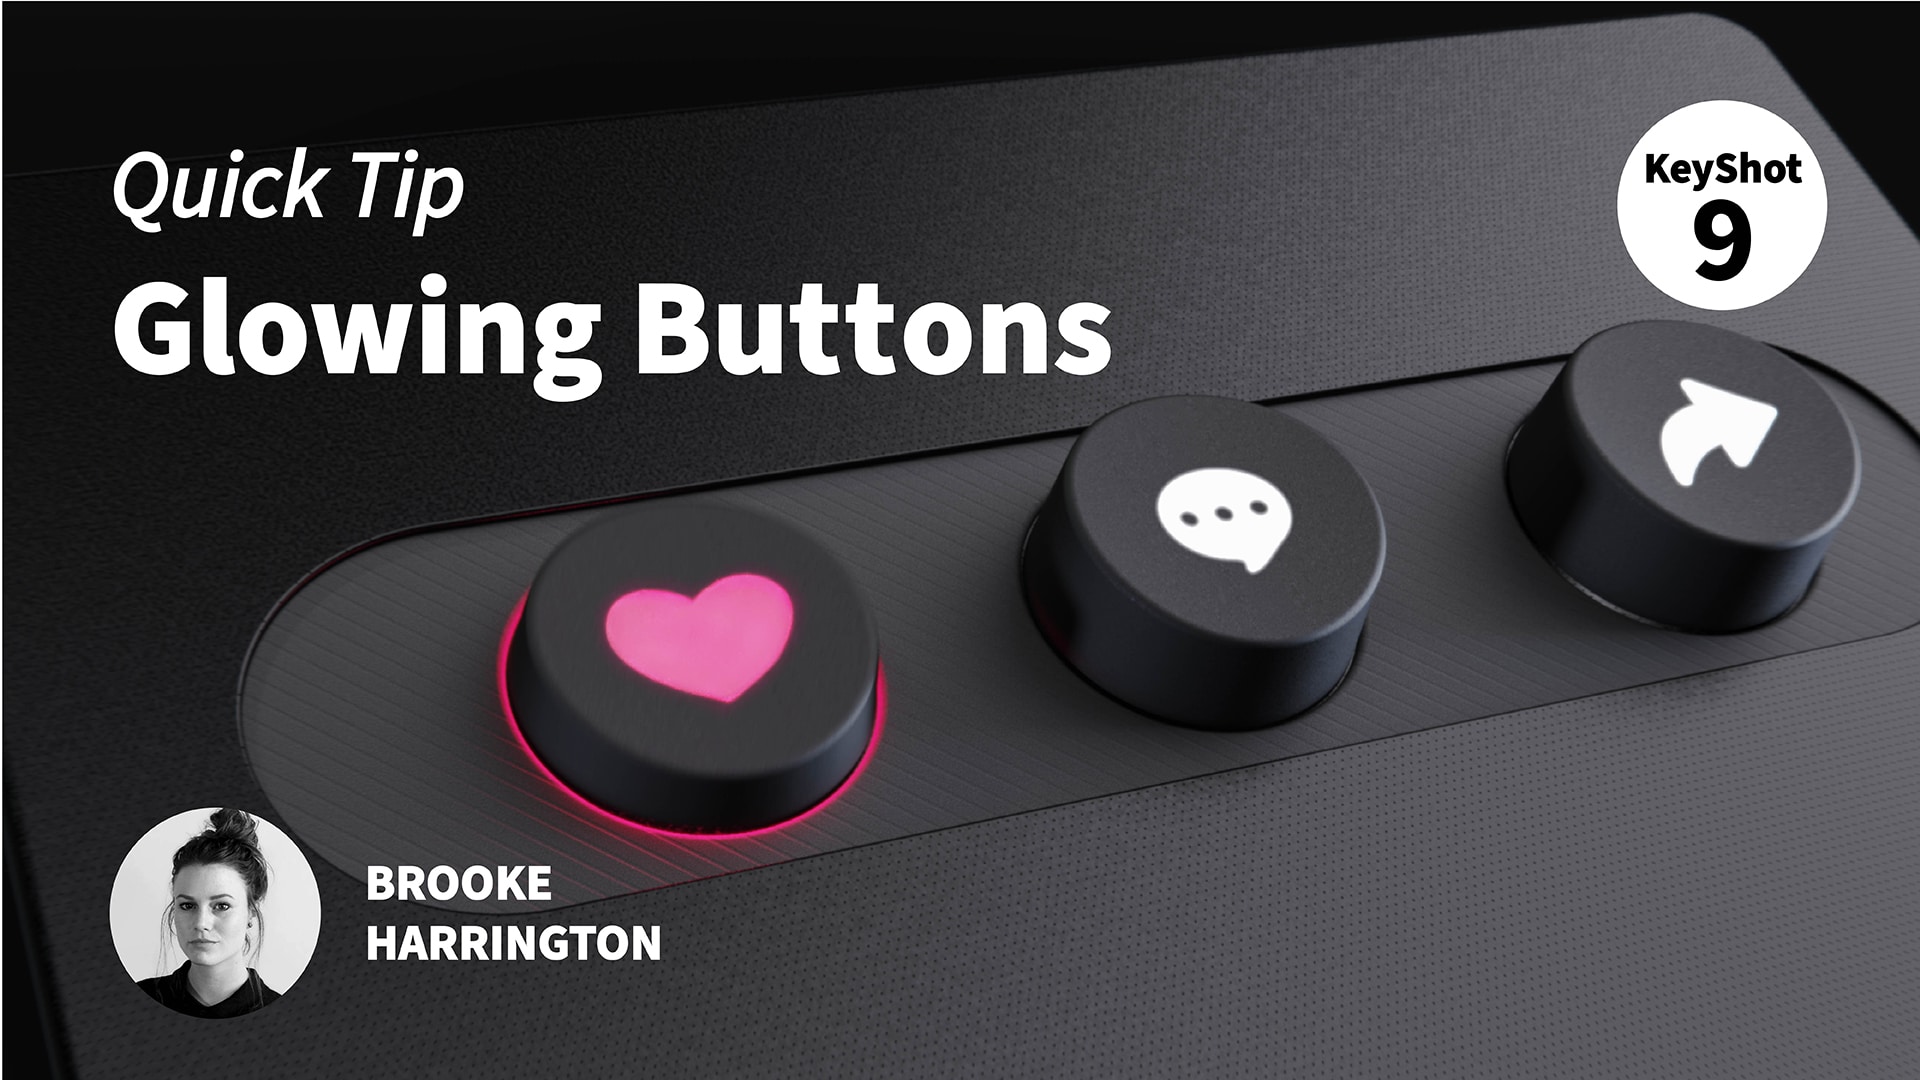 Quick Tip 112: How to Create Glowing Buttons in KeyShot